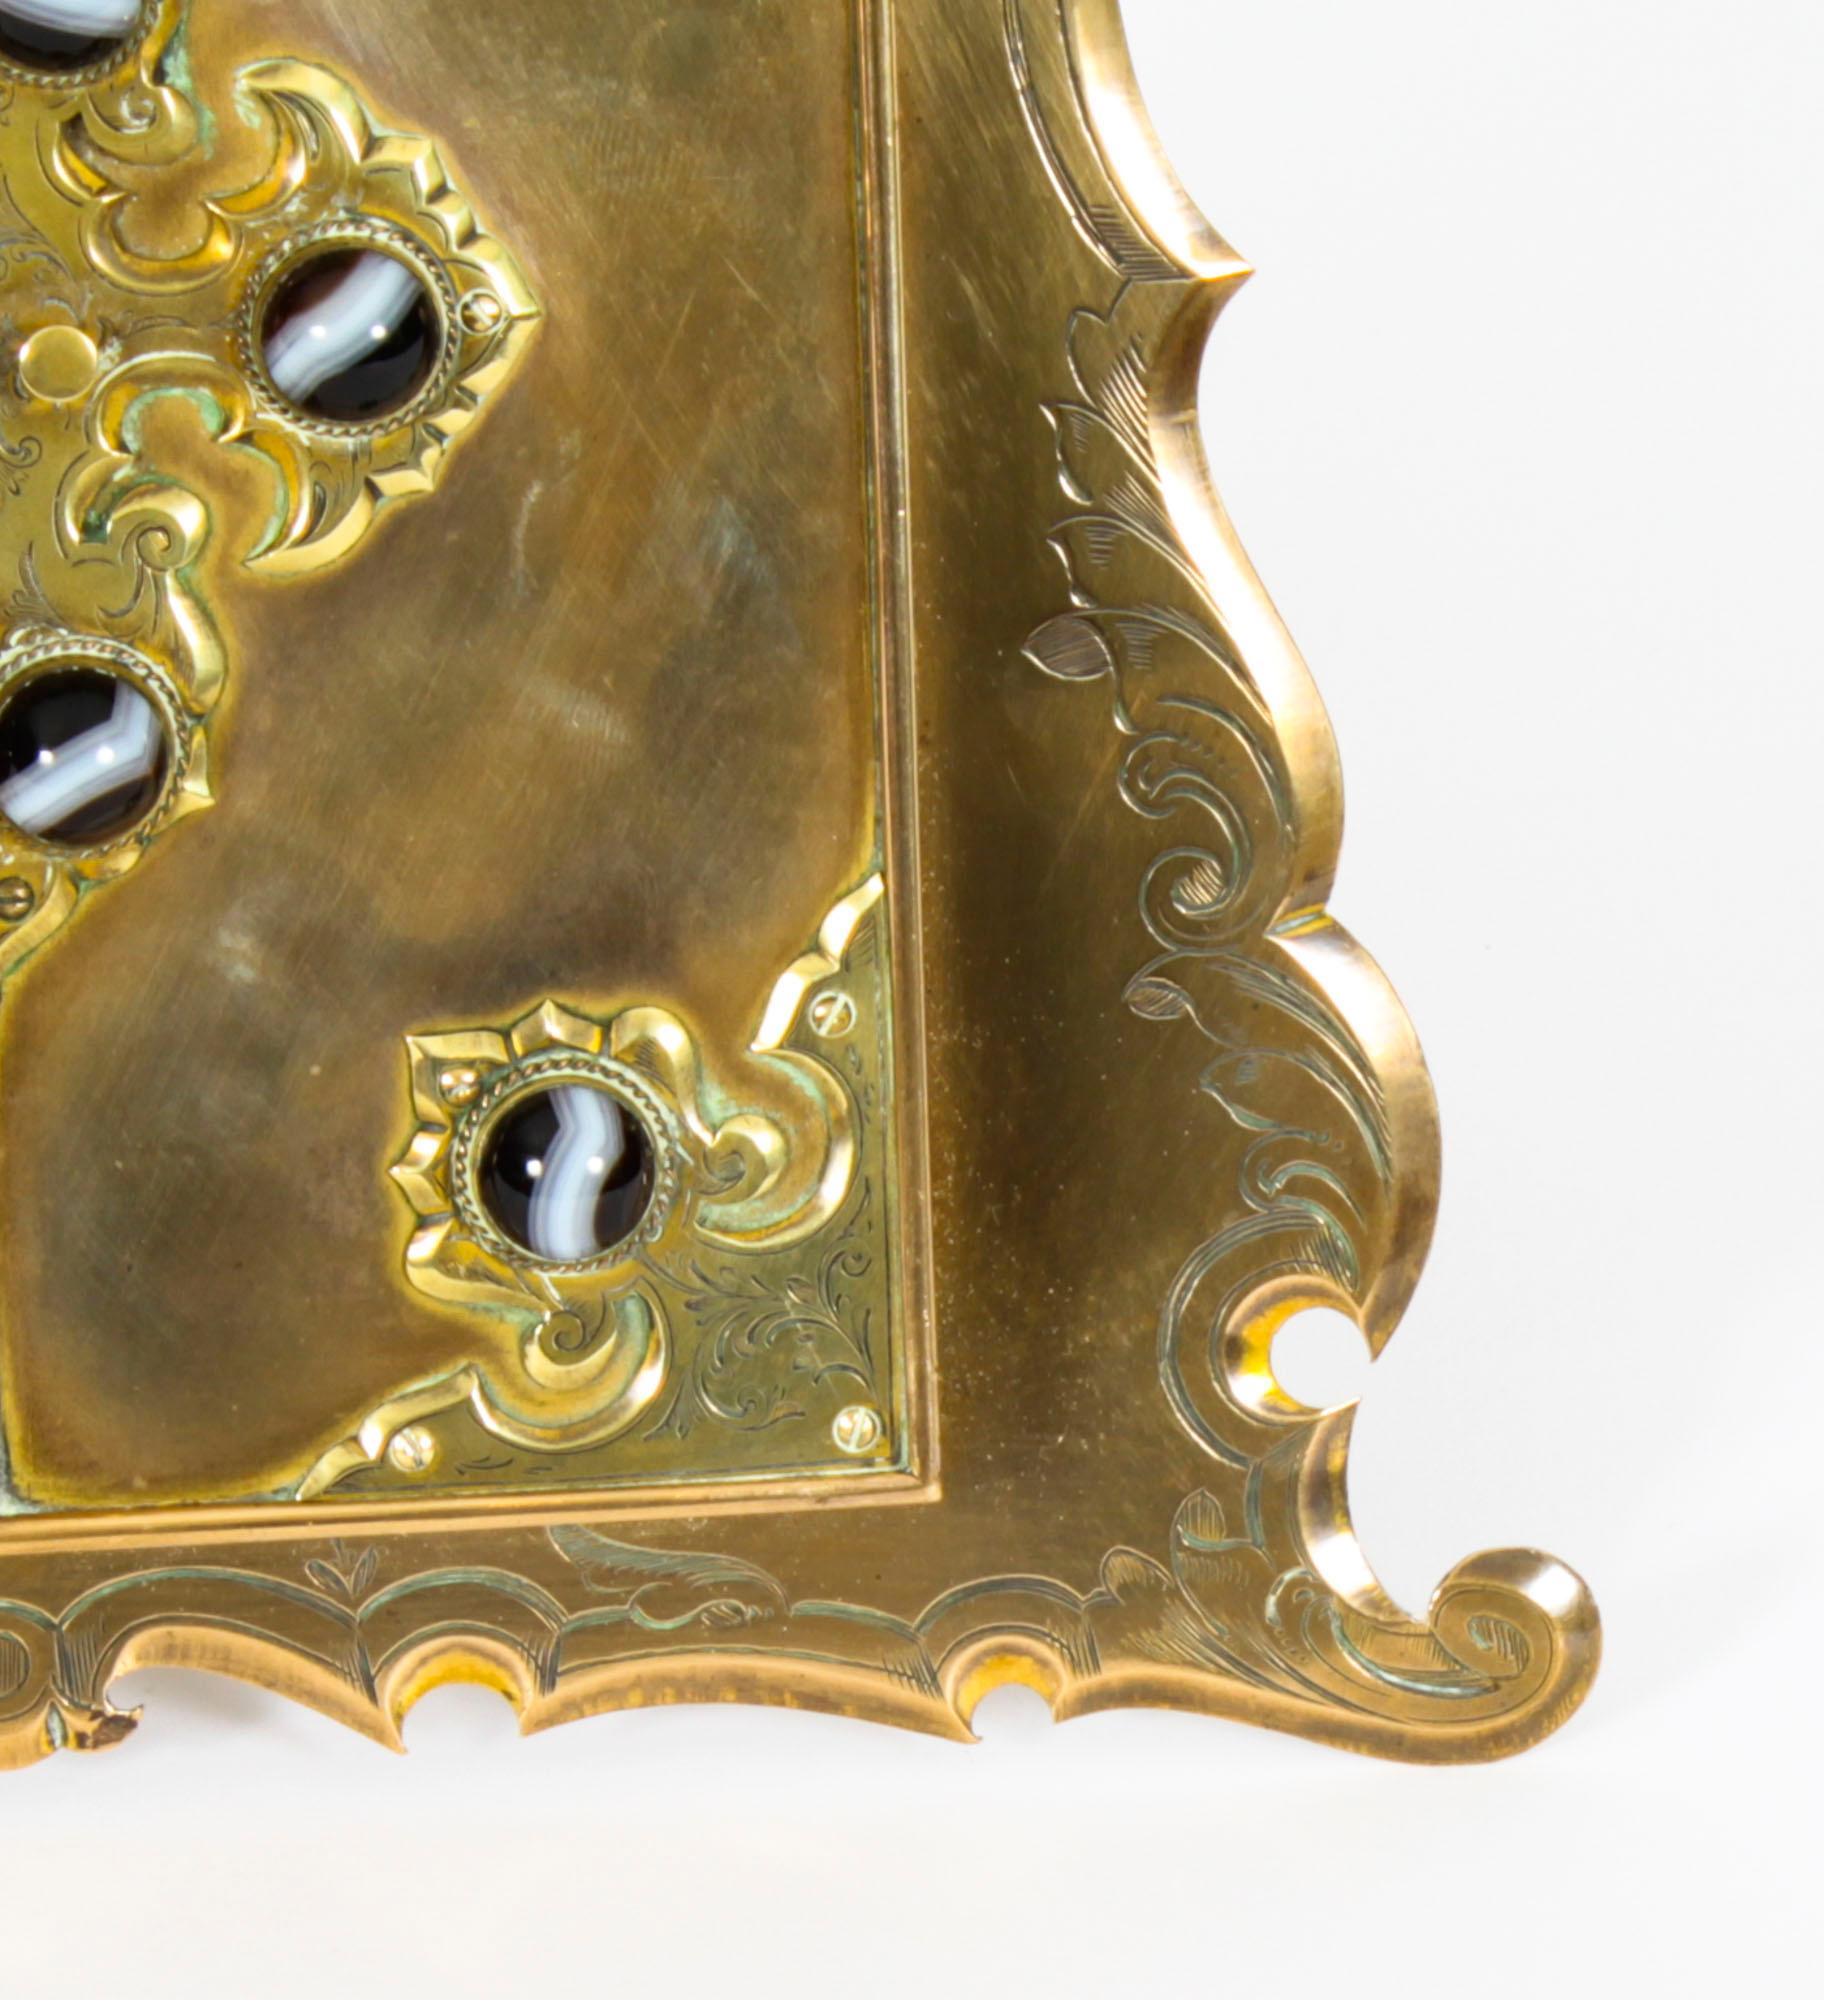 Antique Ormolu & Agate Mounted Easel Photo Frame, 19th Century For Sale 4